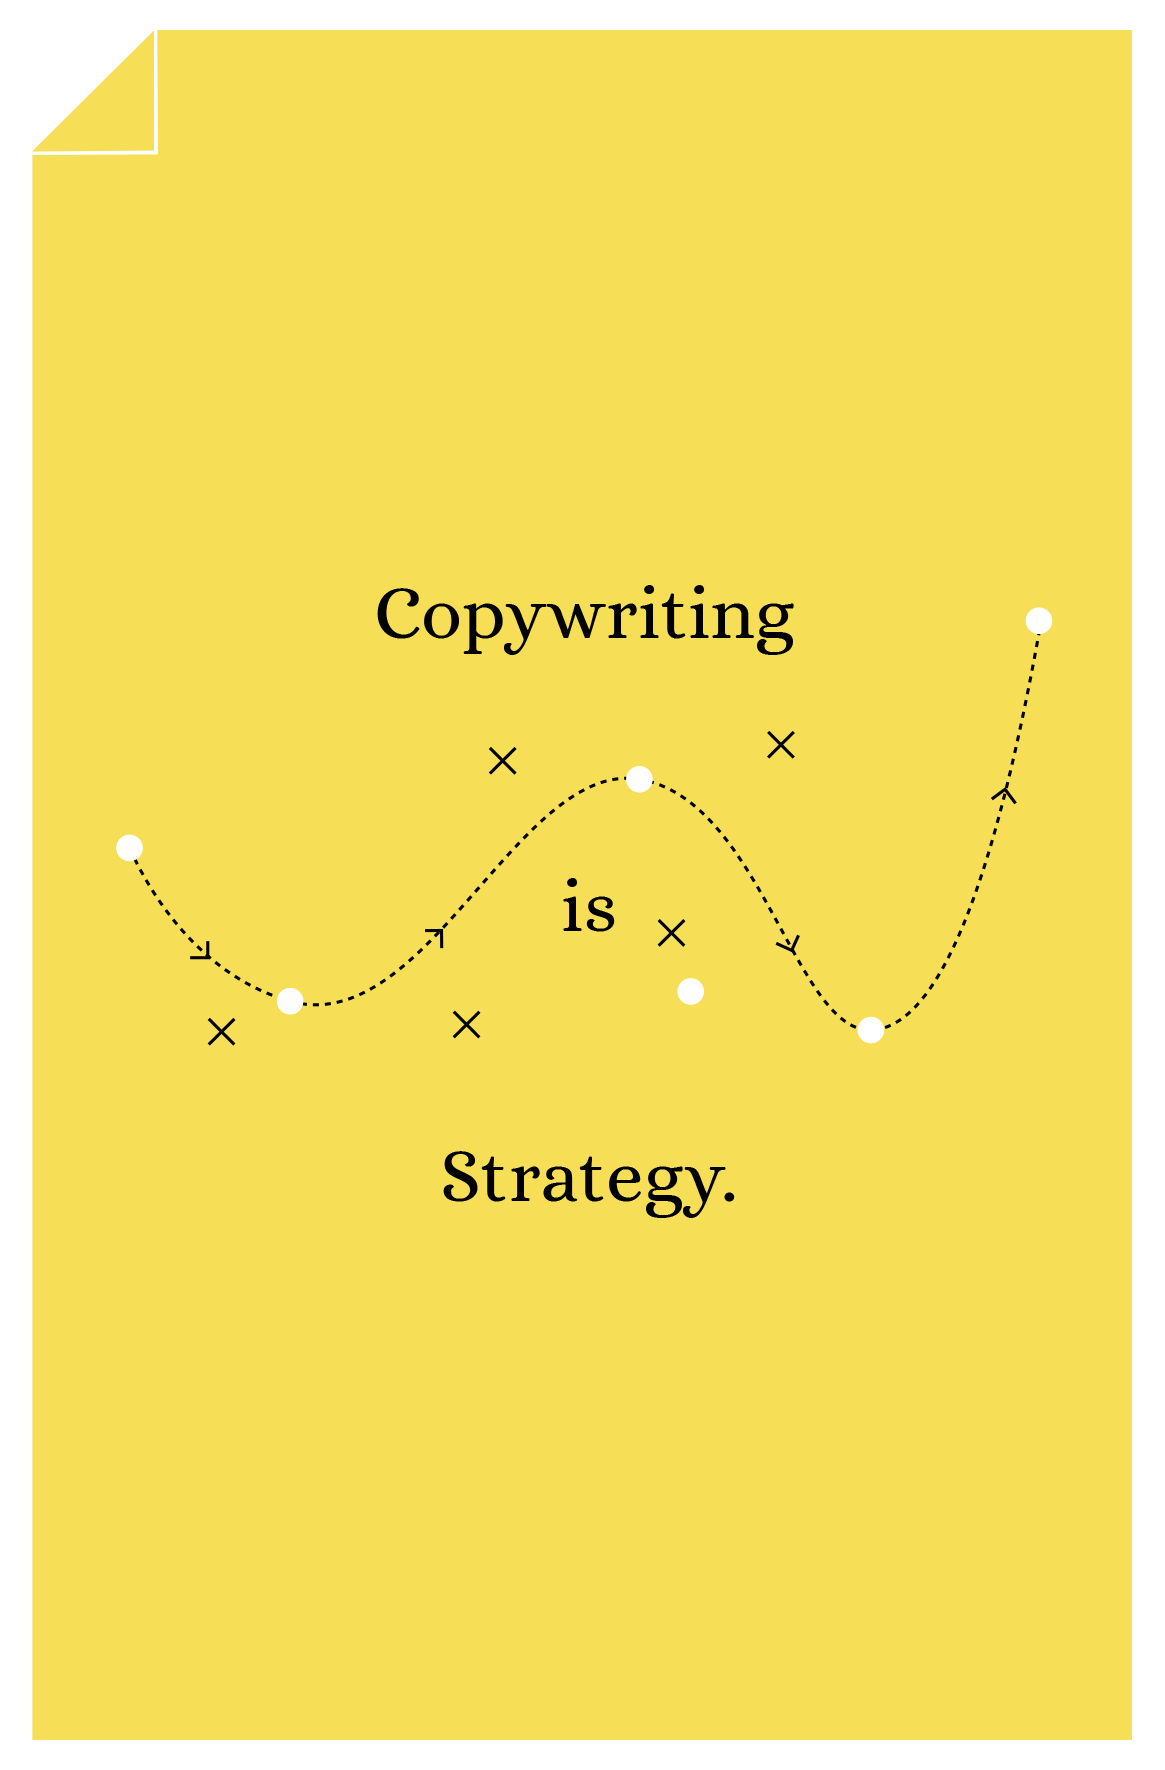 Copywriting is strategy